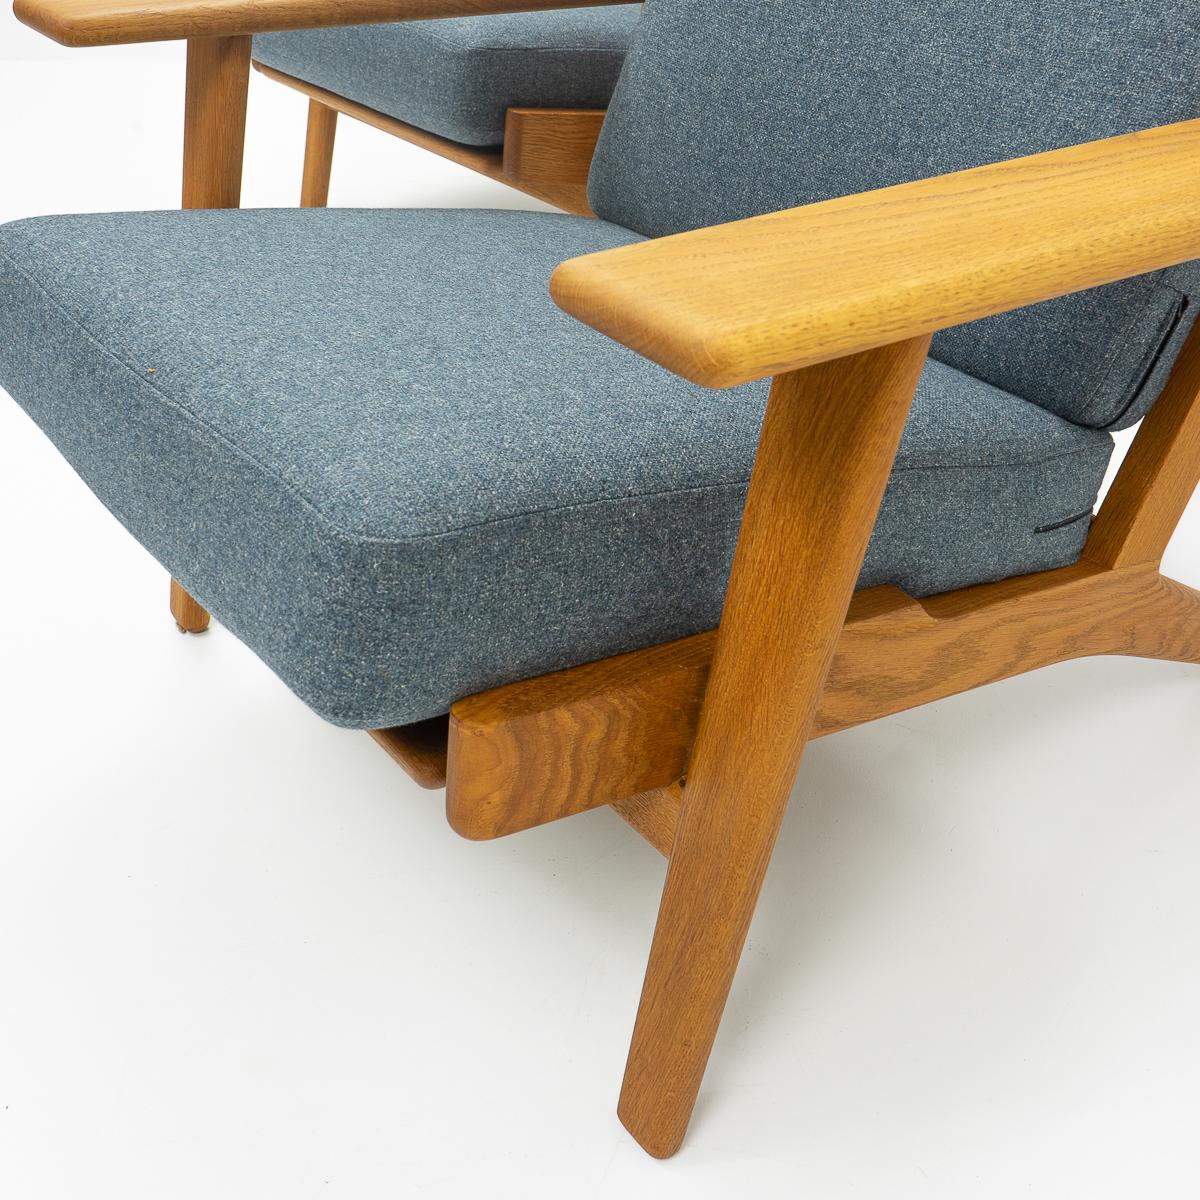 Danish Design Classic GE 290 Arm Chairs by Hans Wegner for Getama, 1960s For Sale 6